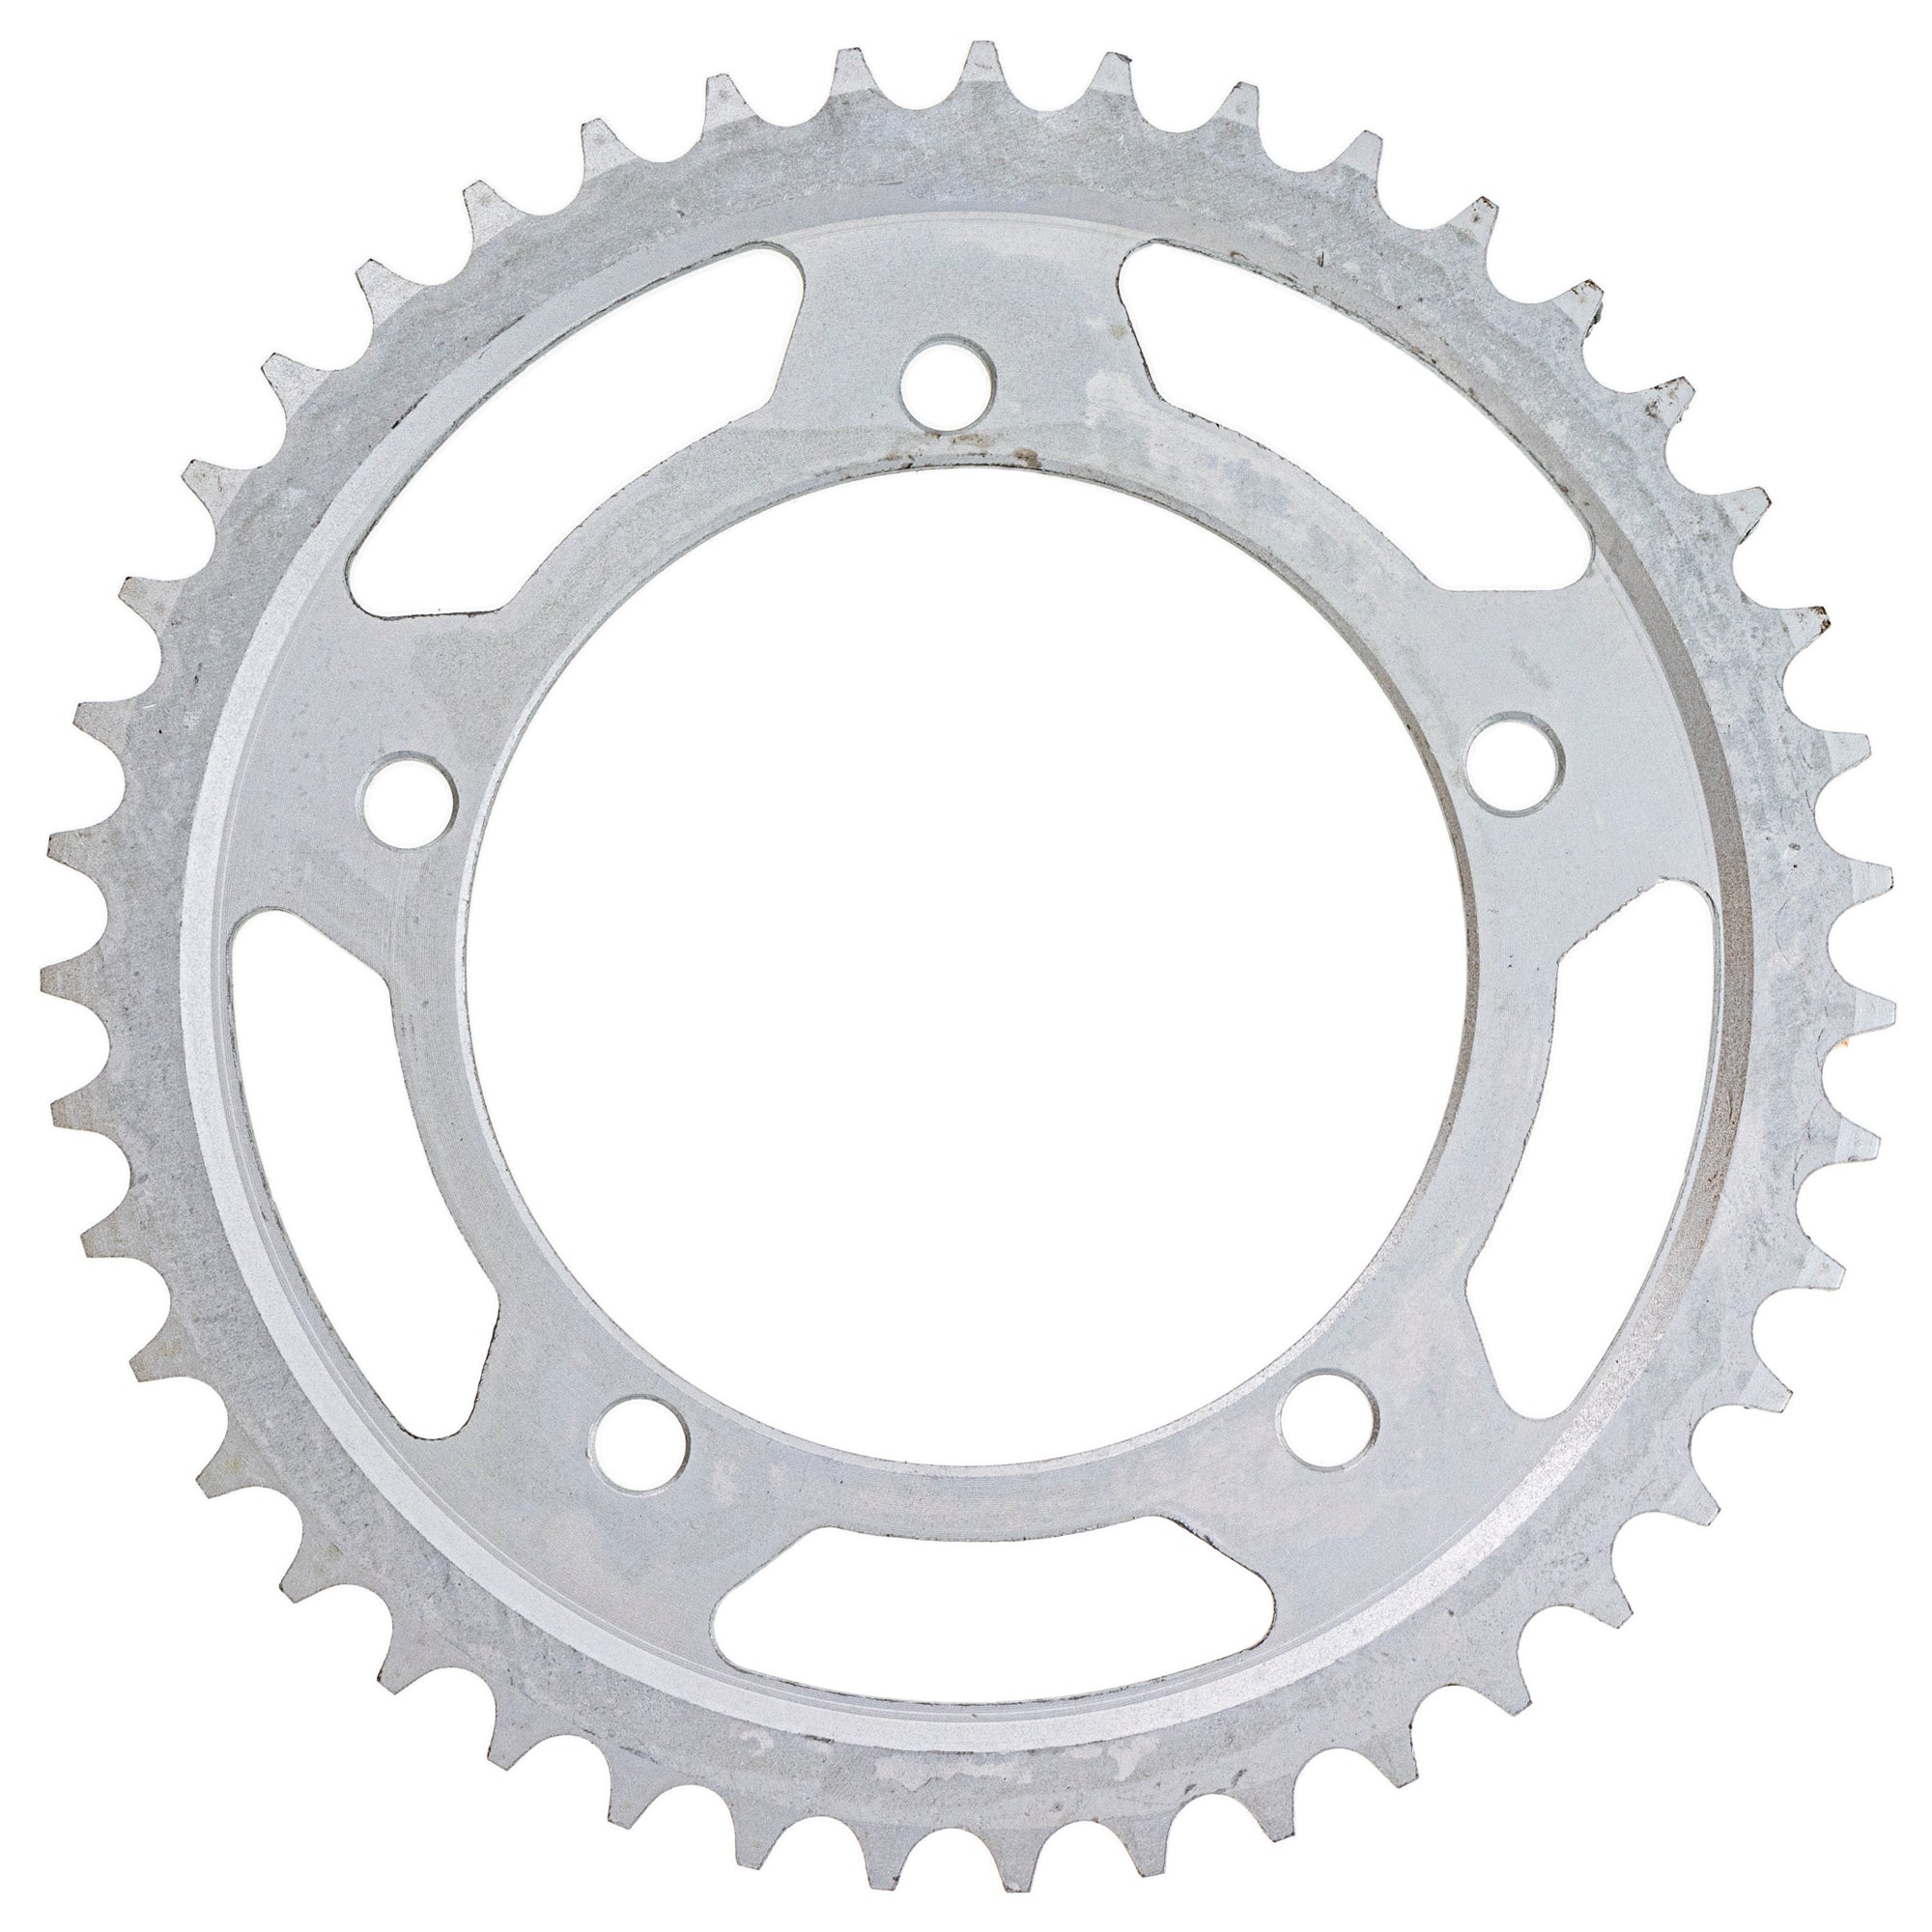 525 17 Tooth Front Drive Sprocket for Triumph America Bonneville